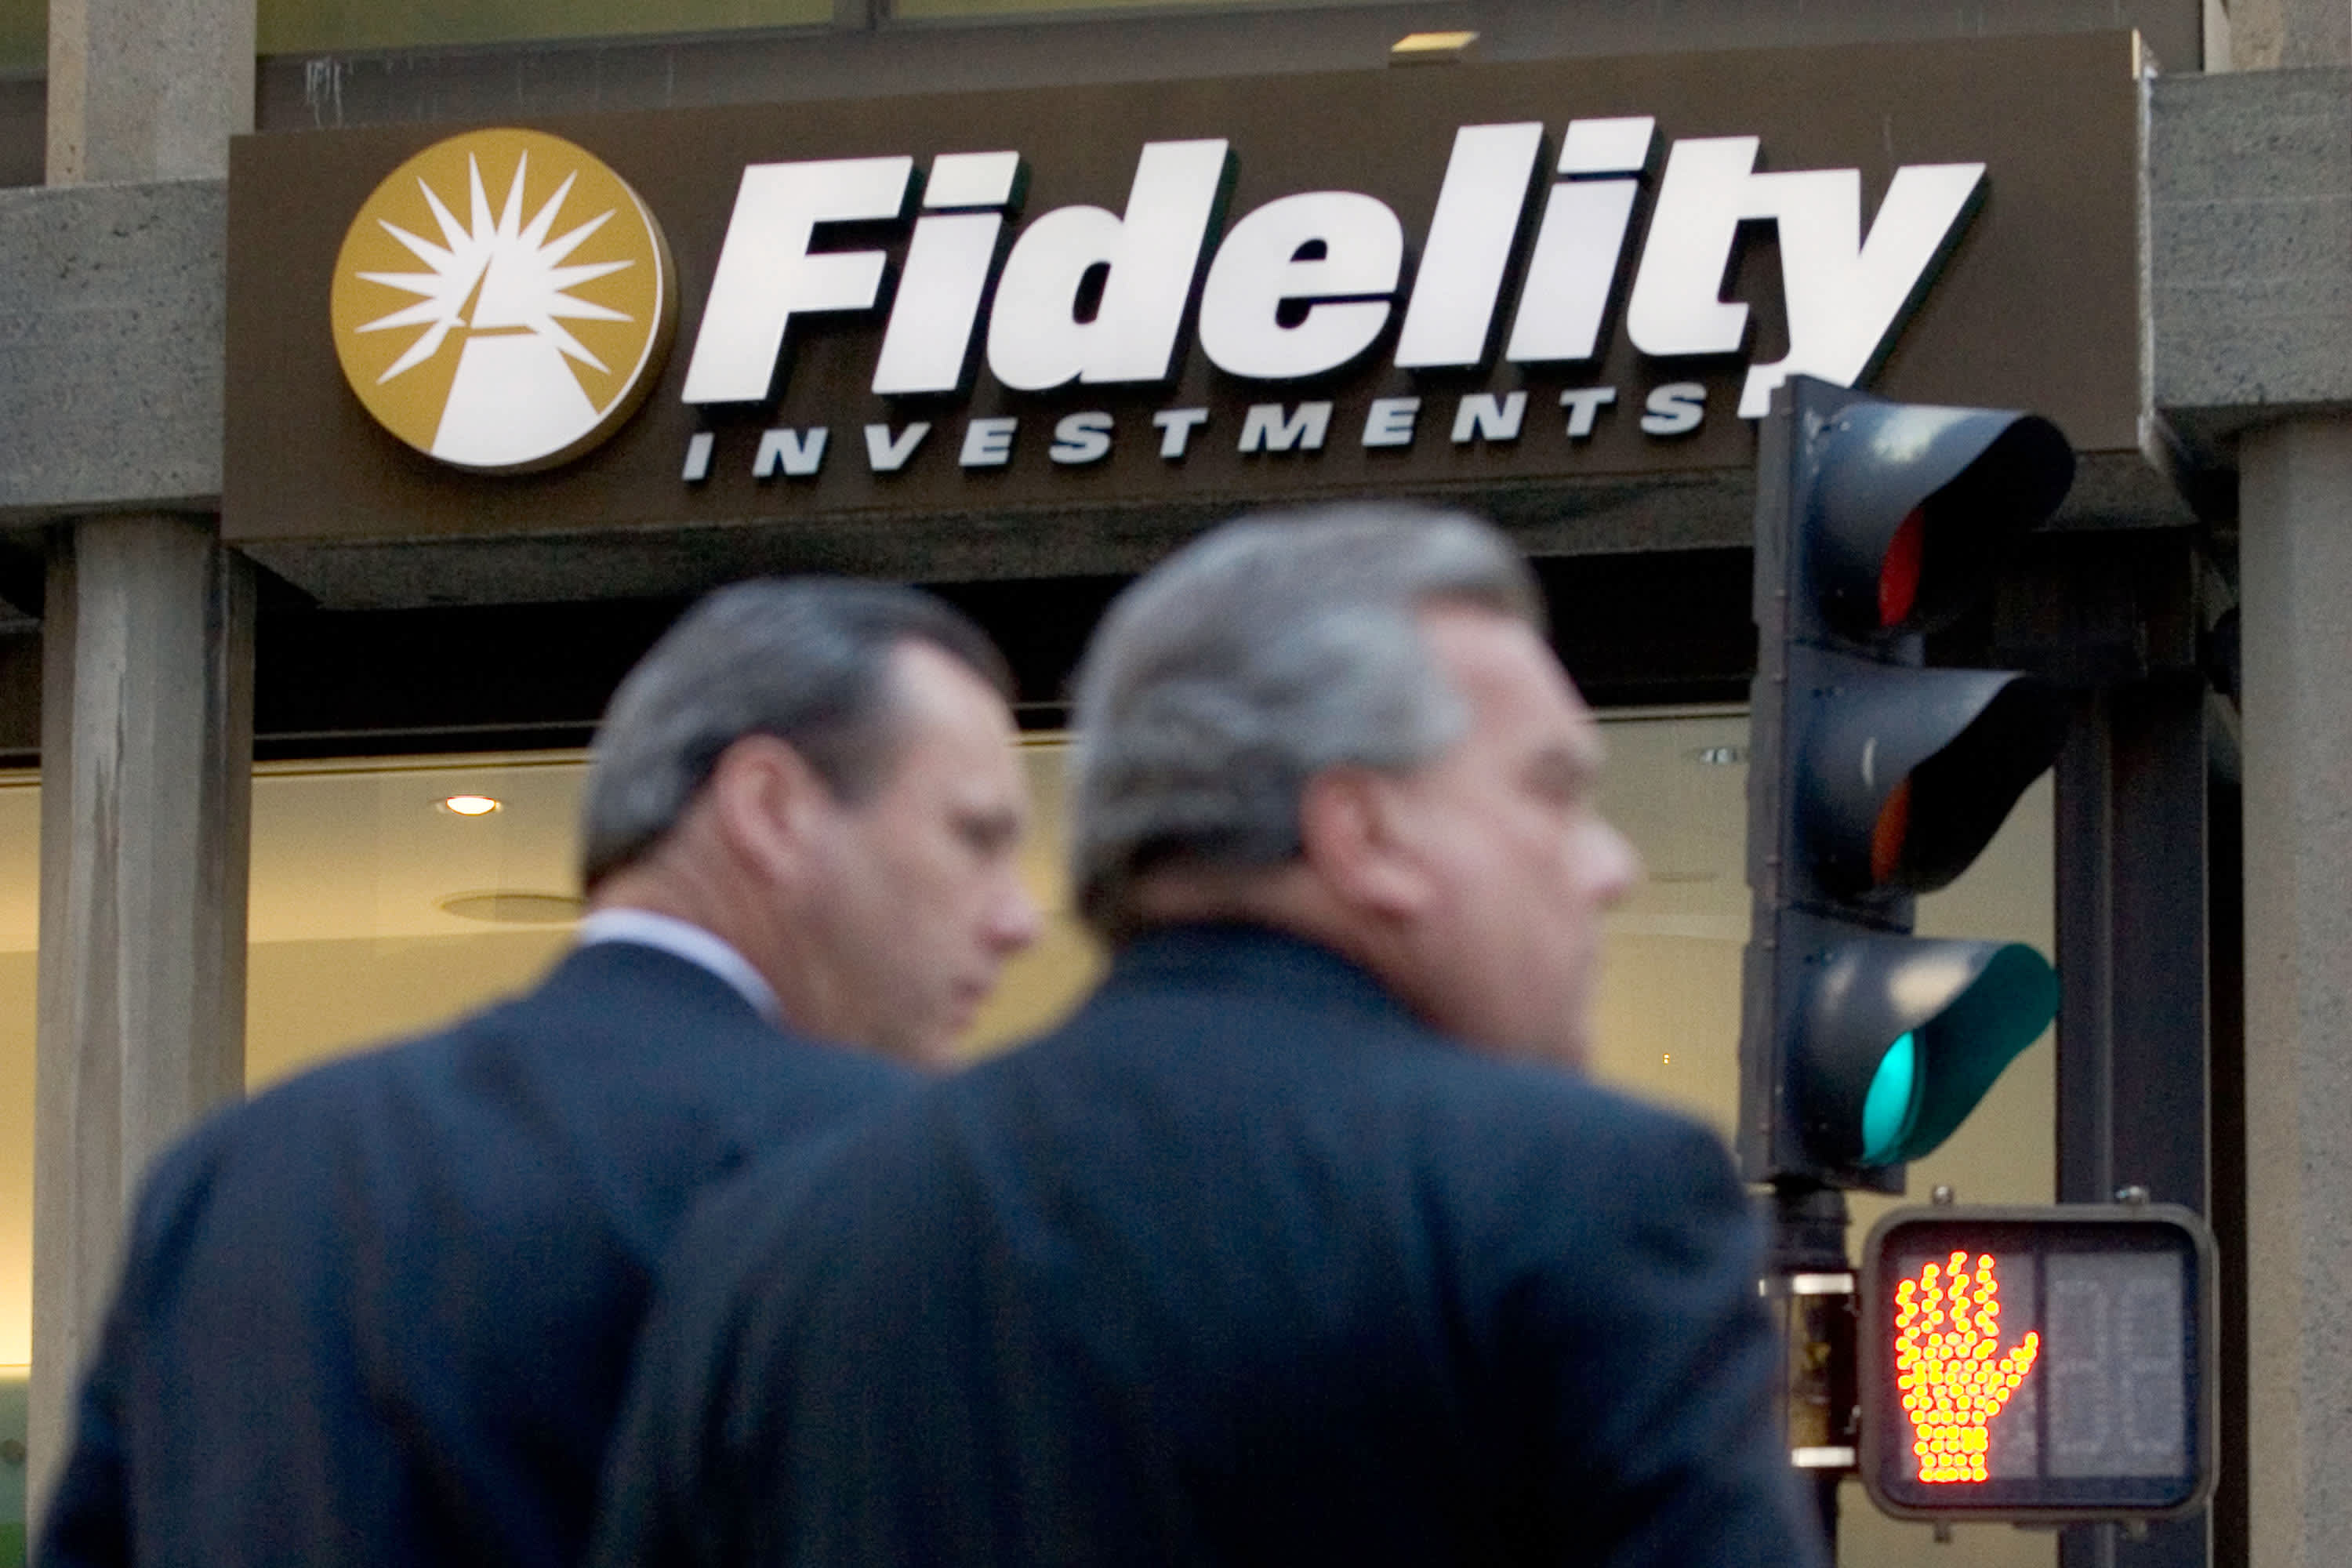 Fidelity’s Crypto Platform Is Now Open. Is It Any Good? - NerdWallet